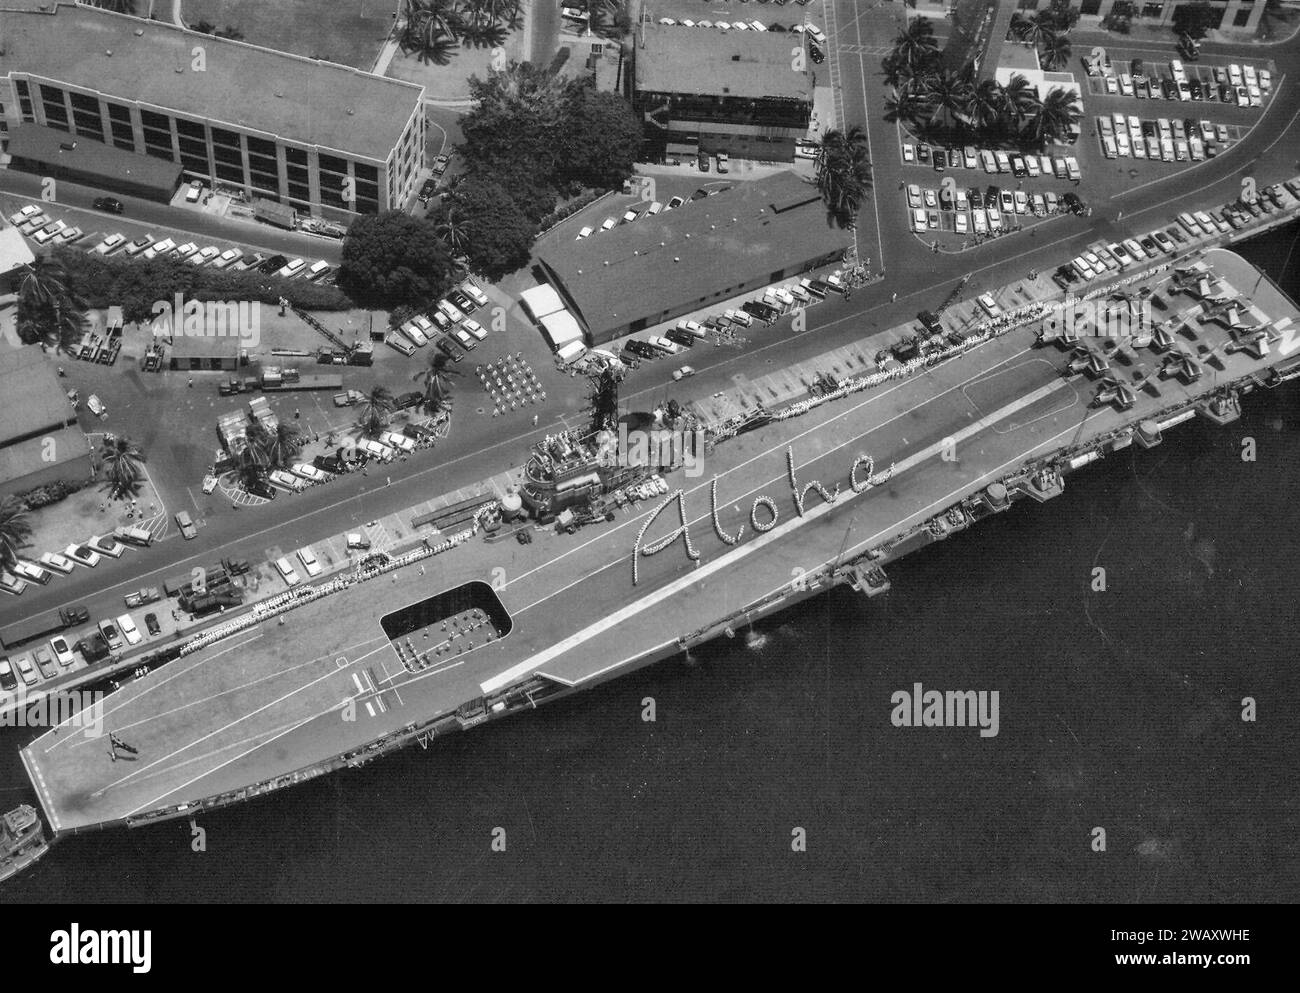 The Australian carrier HMAS Melbourne (R21) moored at Pearl Harbor, Hawaii (USA), her crew spelling out 'Aloha' on her flight deck 1958 Stock Photo